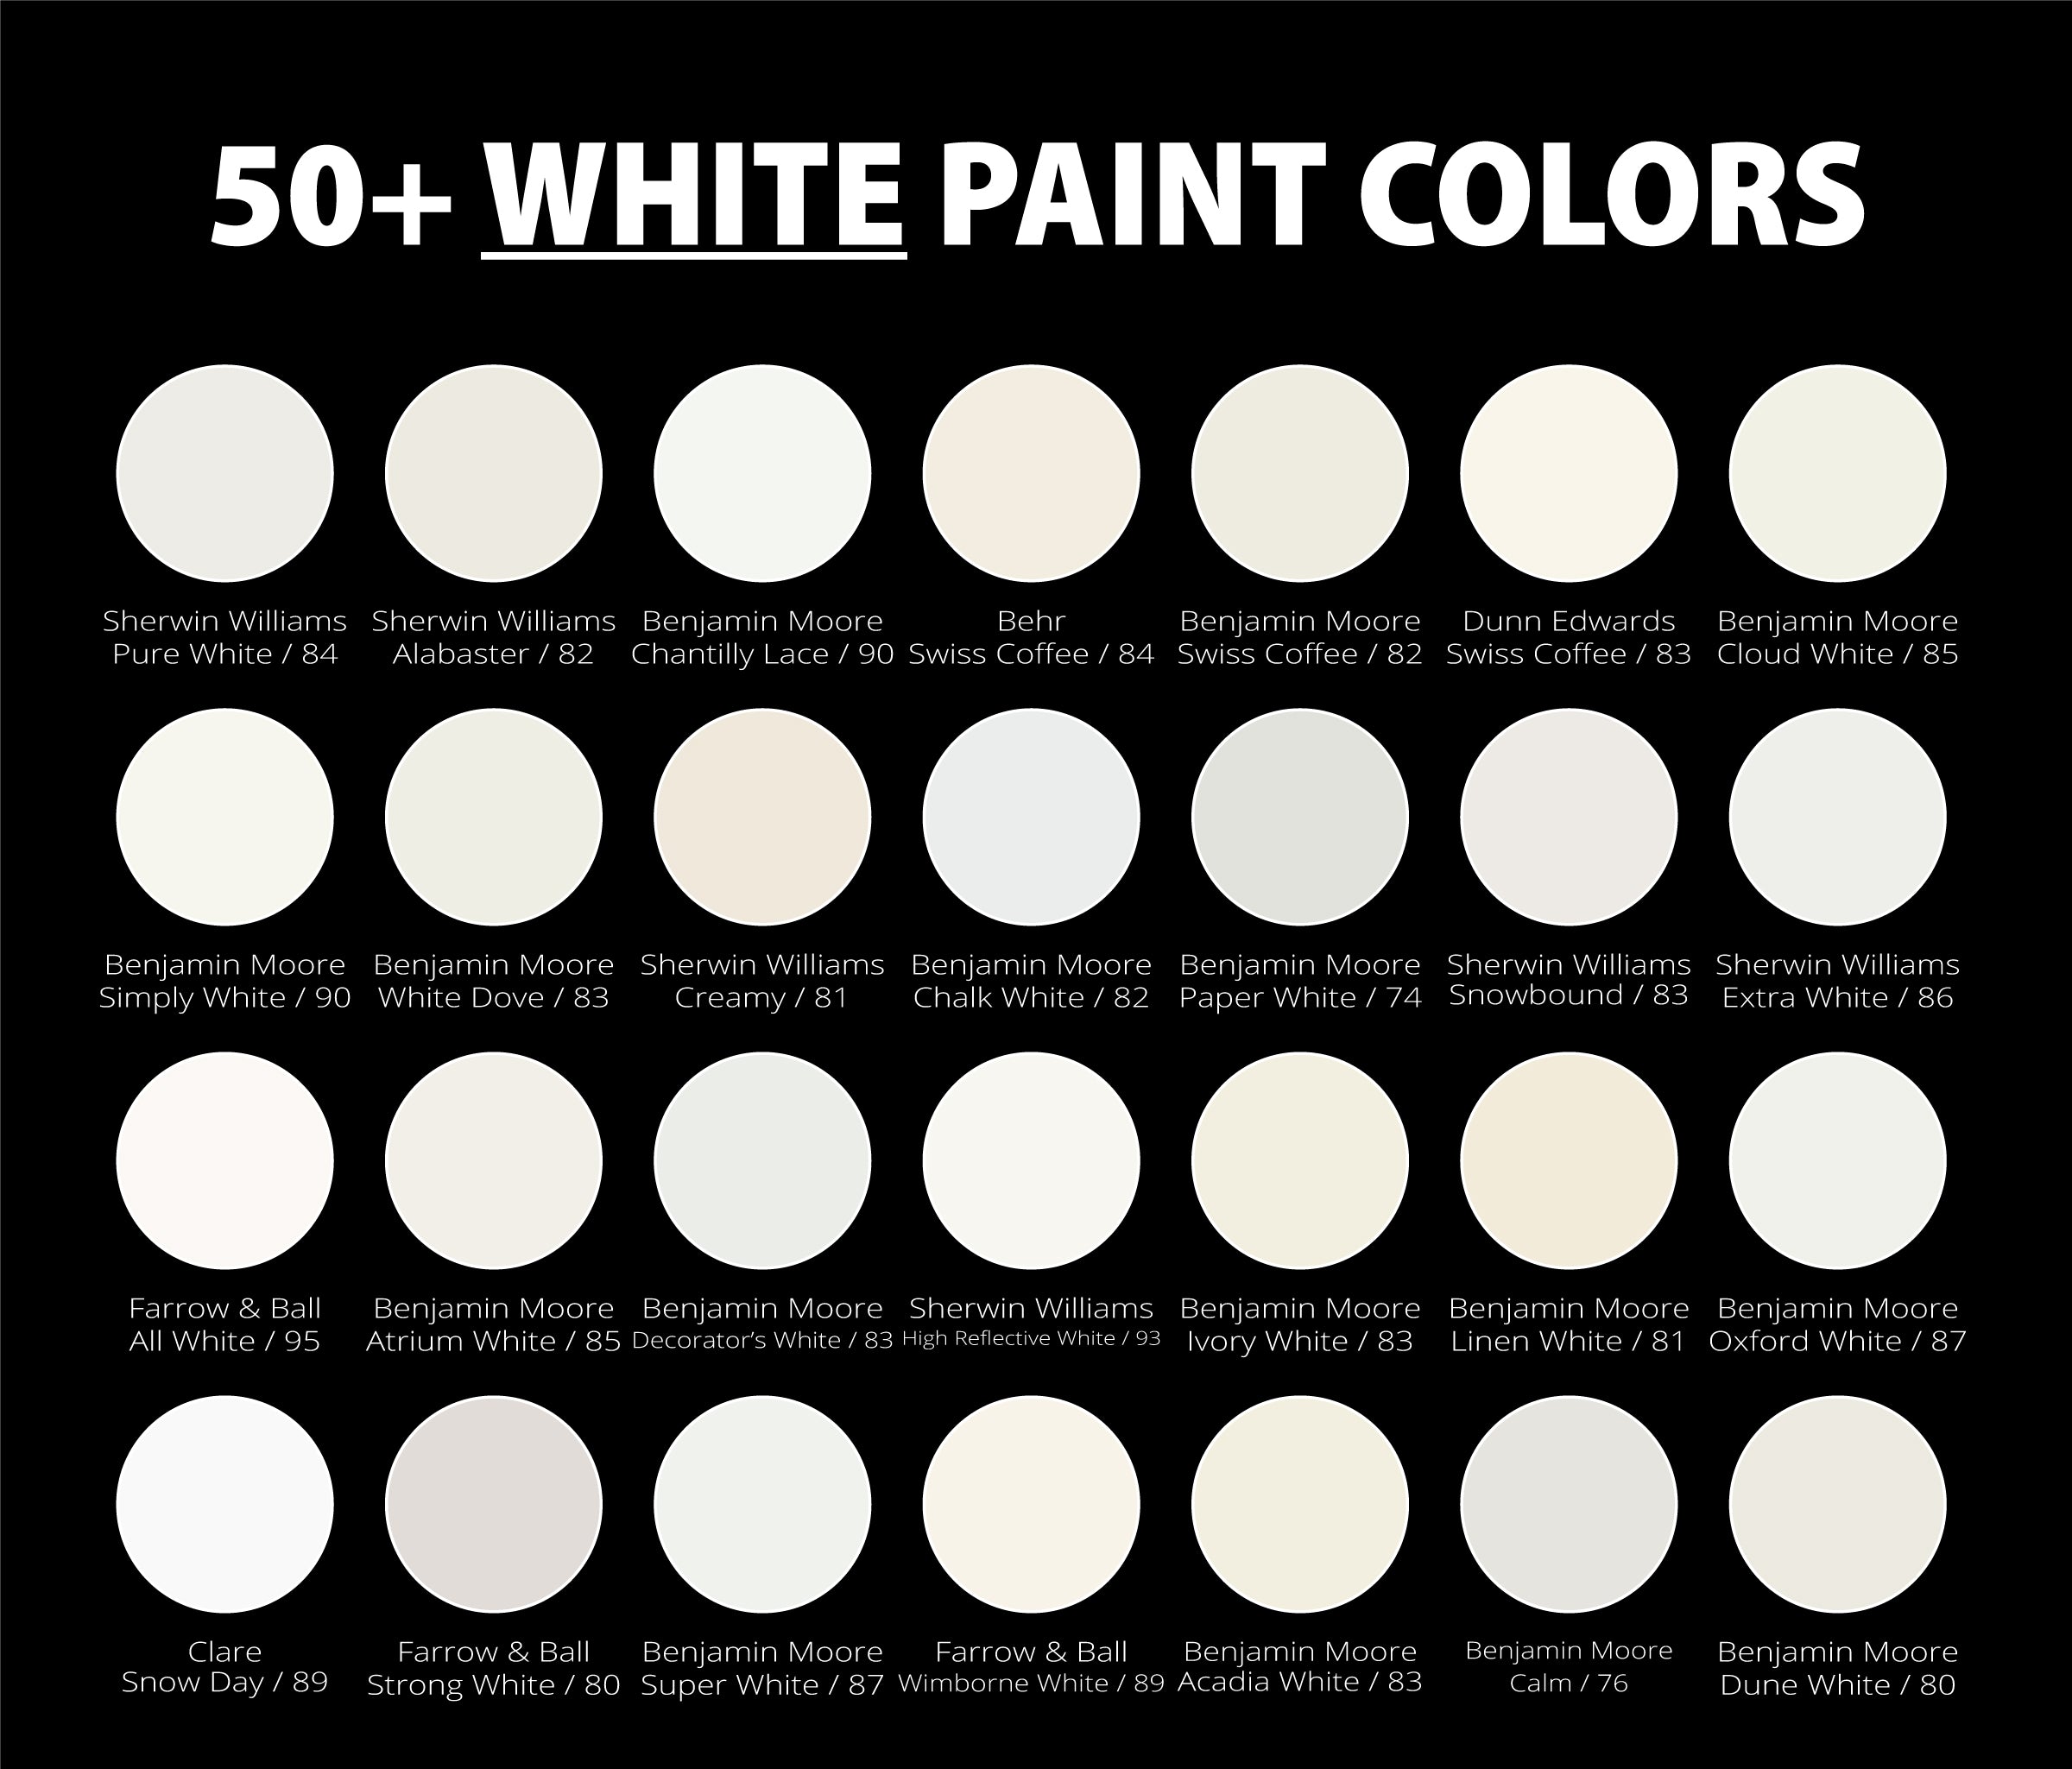 Best-White-Paint-Colors-with-Names-Colors-and-LRV-values-Dark-Background